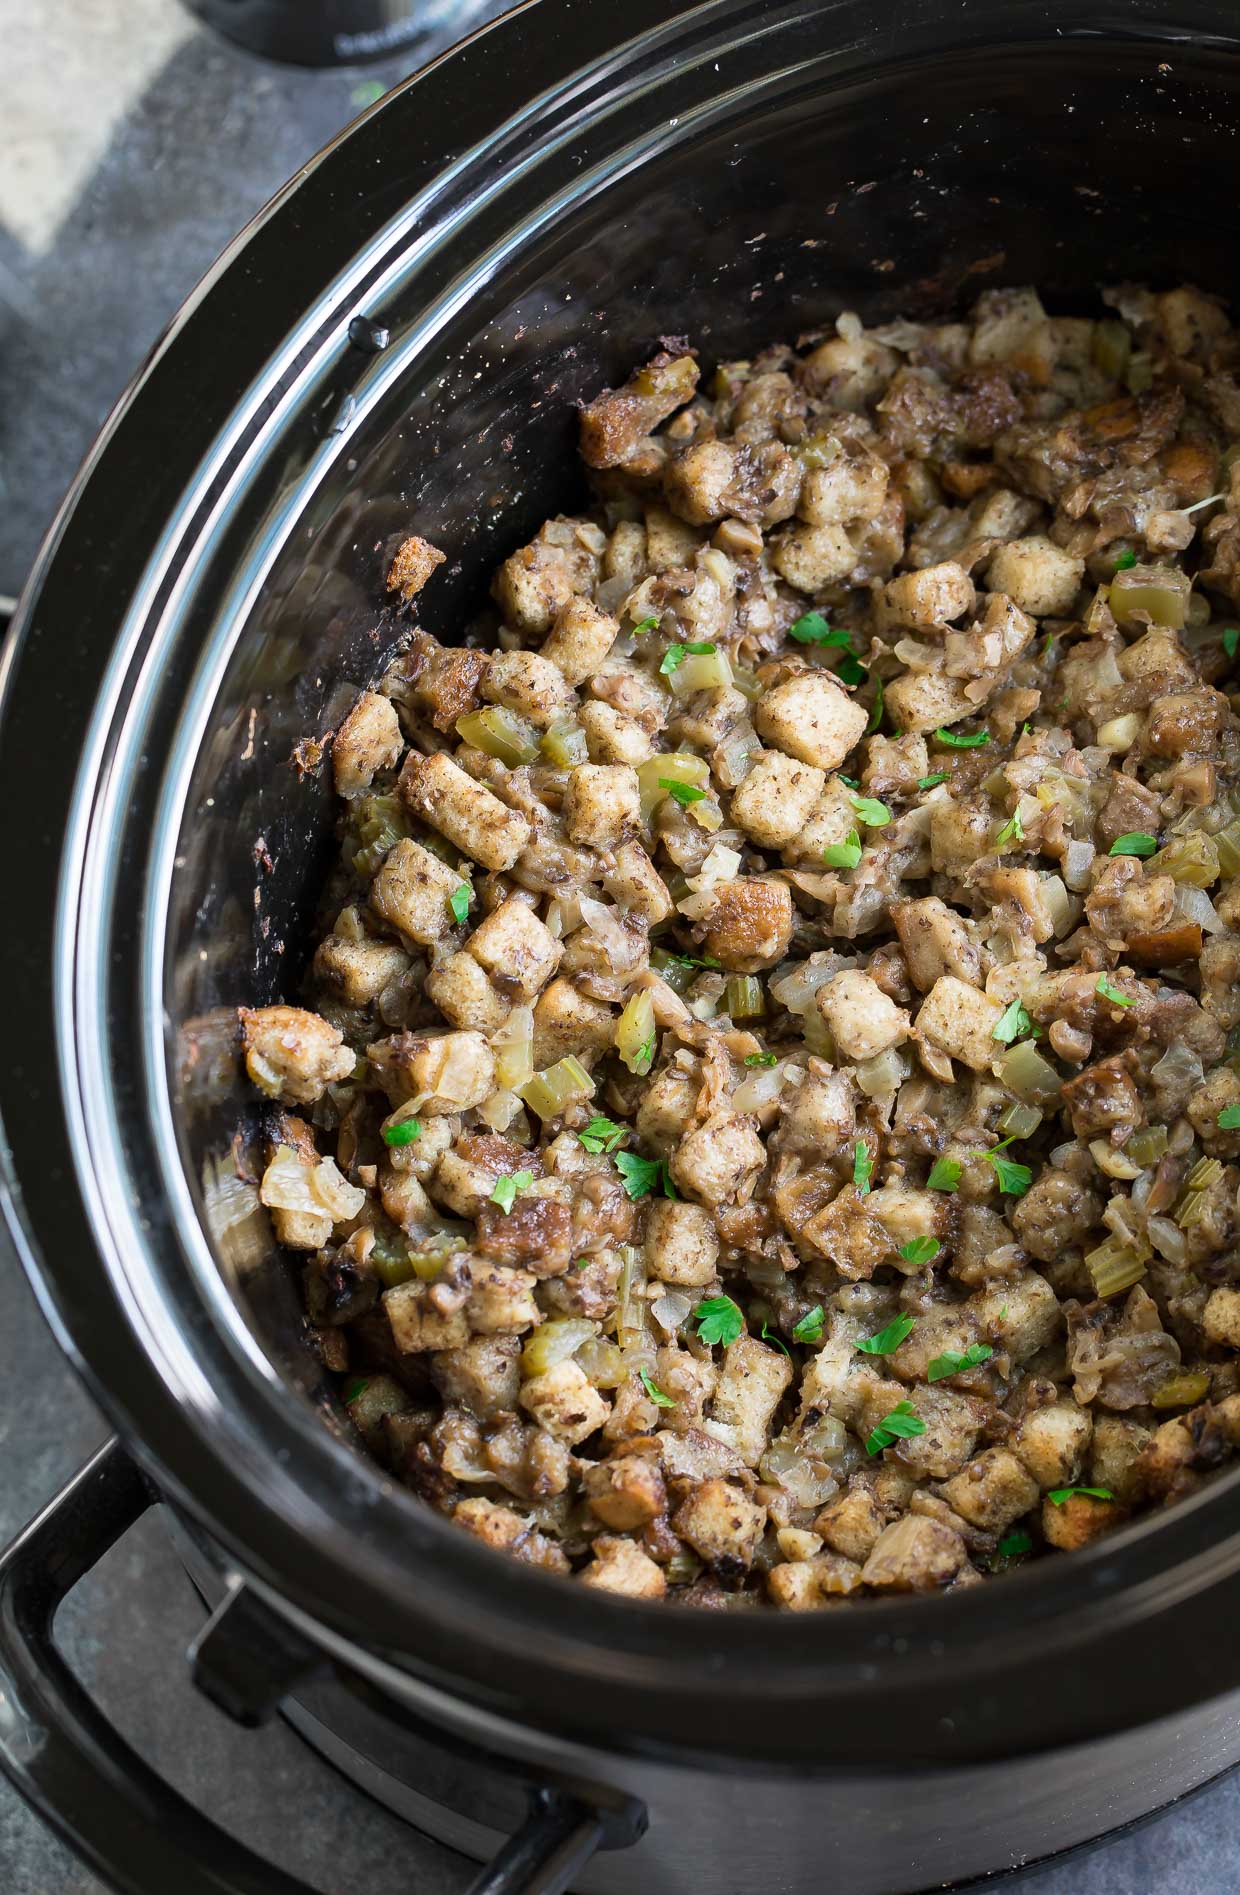 Save precious oven space with this classic Slow Cooker Stuffing recipe! Since converting my mom's Thanksgiving stuffing to the crock-pot I've been OBSESSED with the results. It comes out perfectly tender on the inside and crisp on the outside!